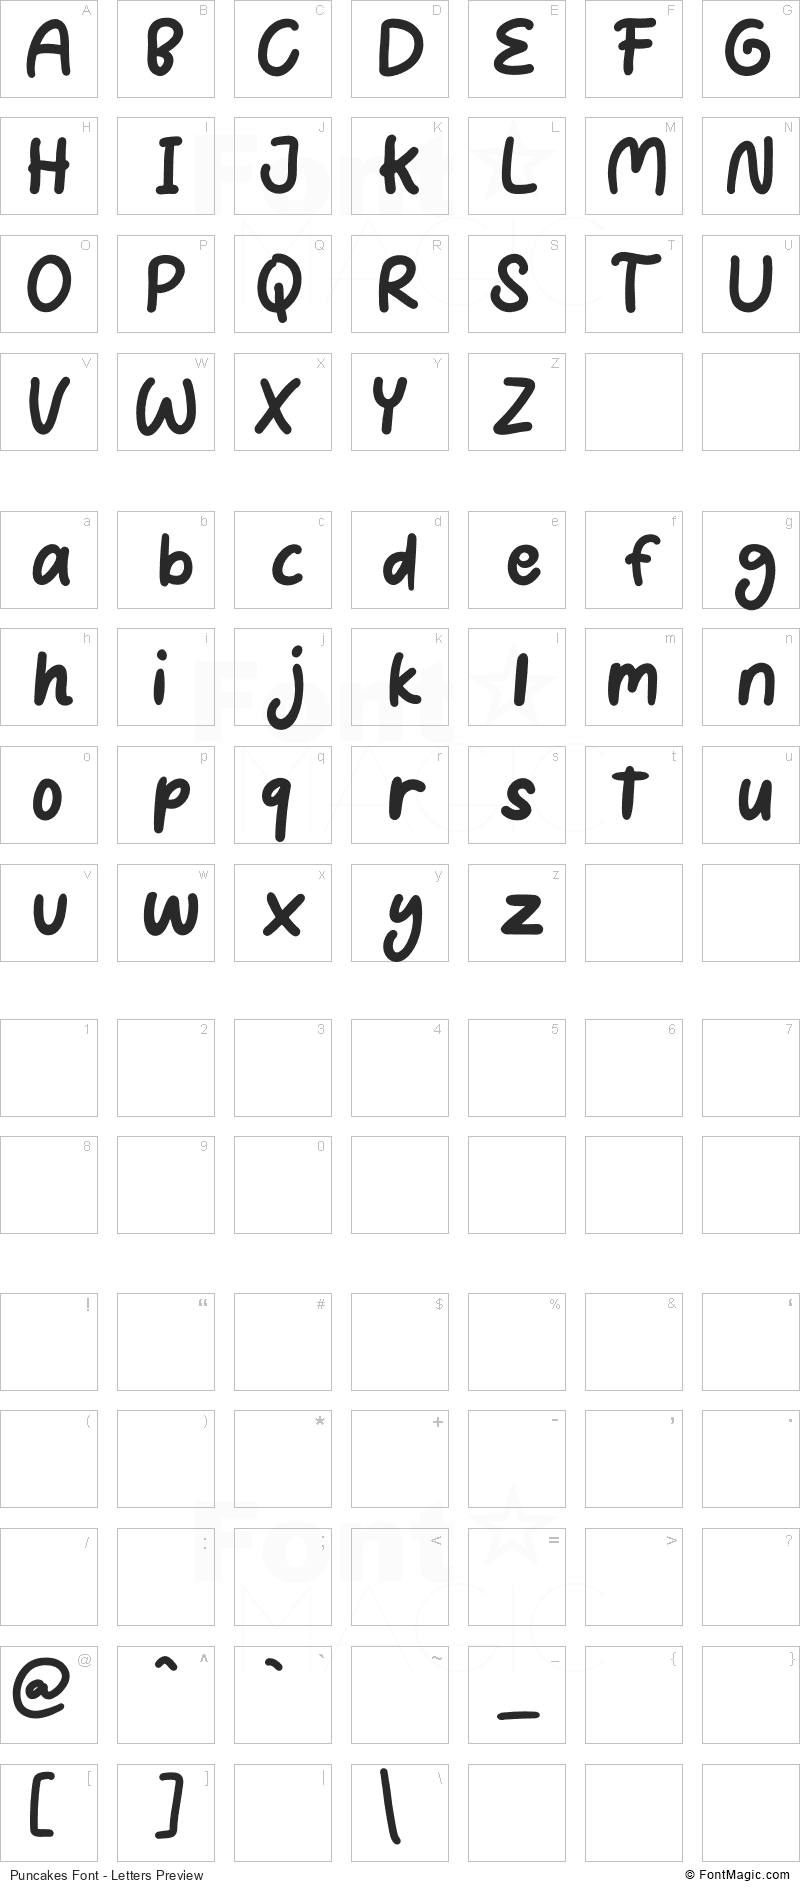 Puncakes Font - All Latters Preview Chart